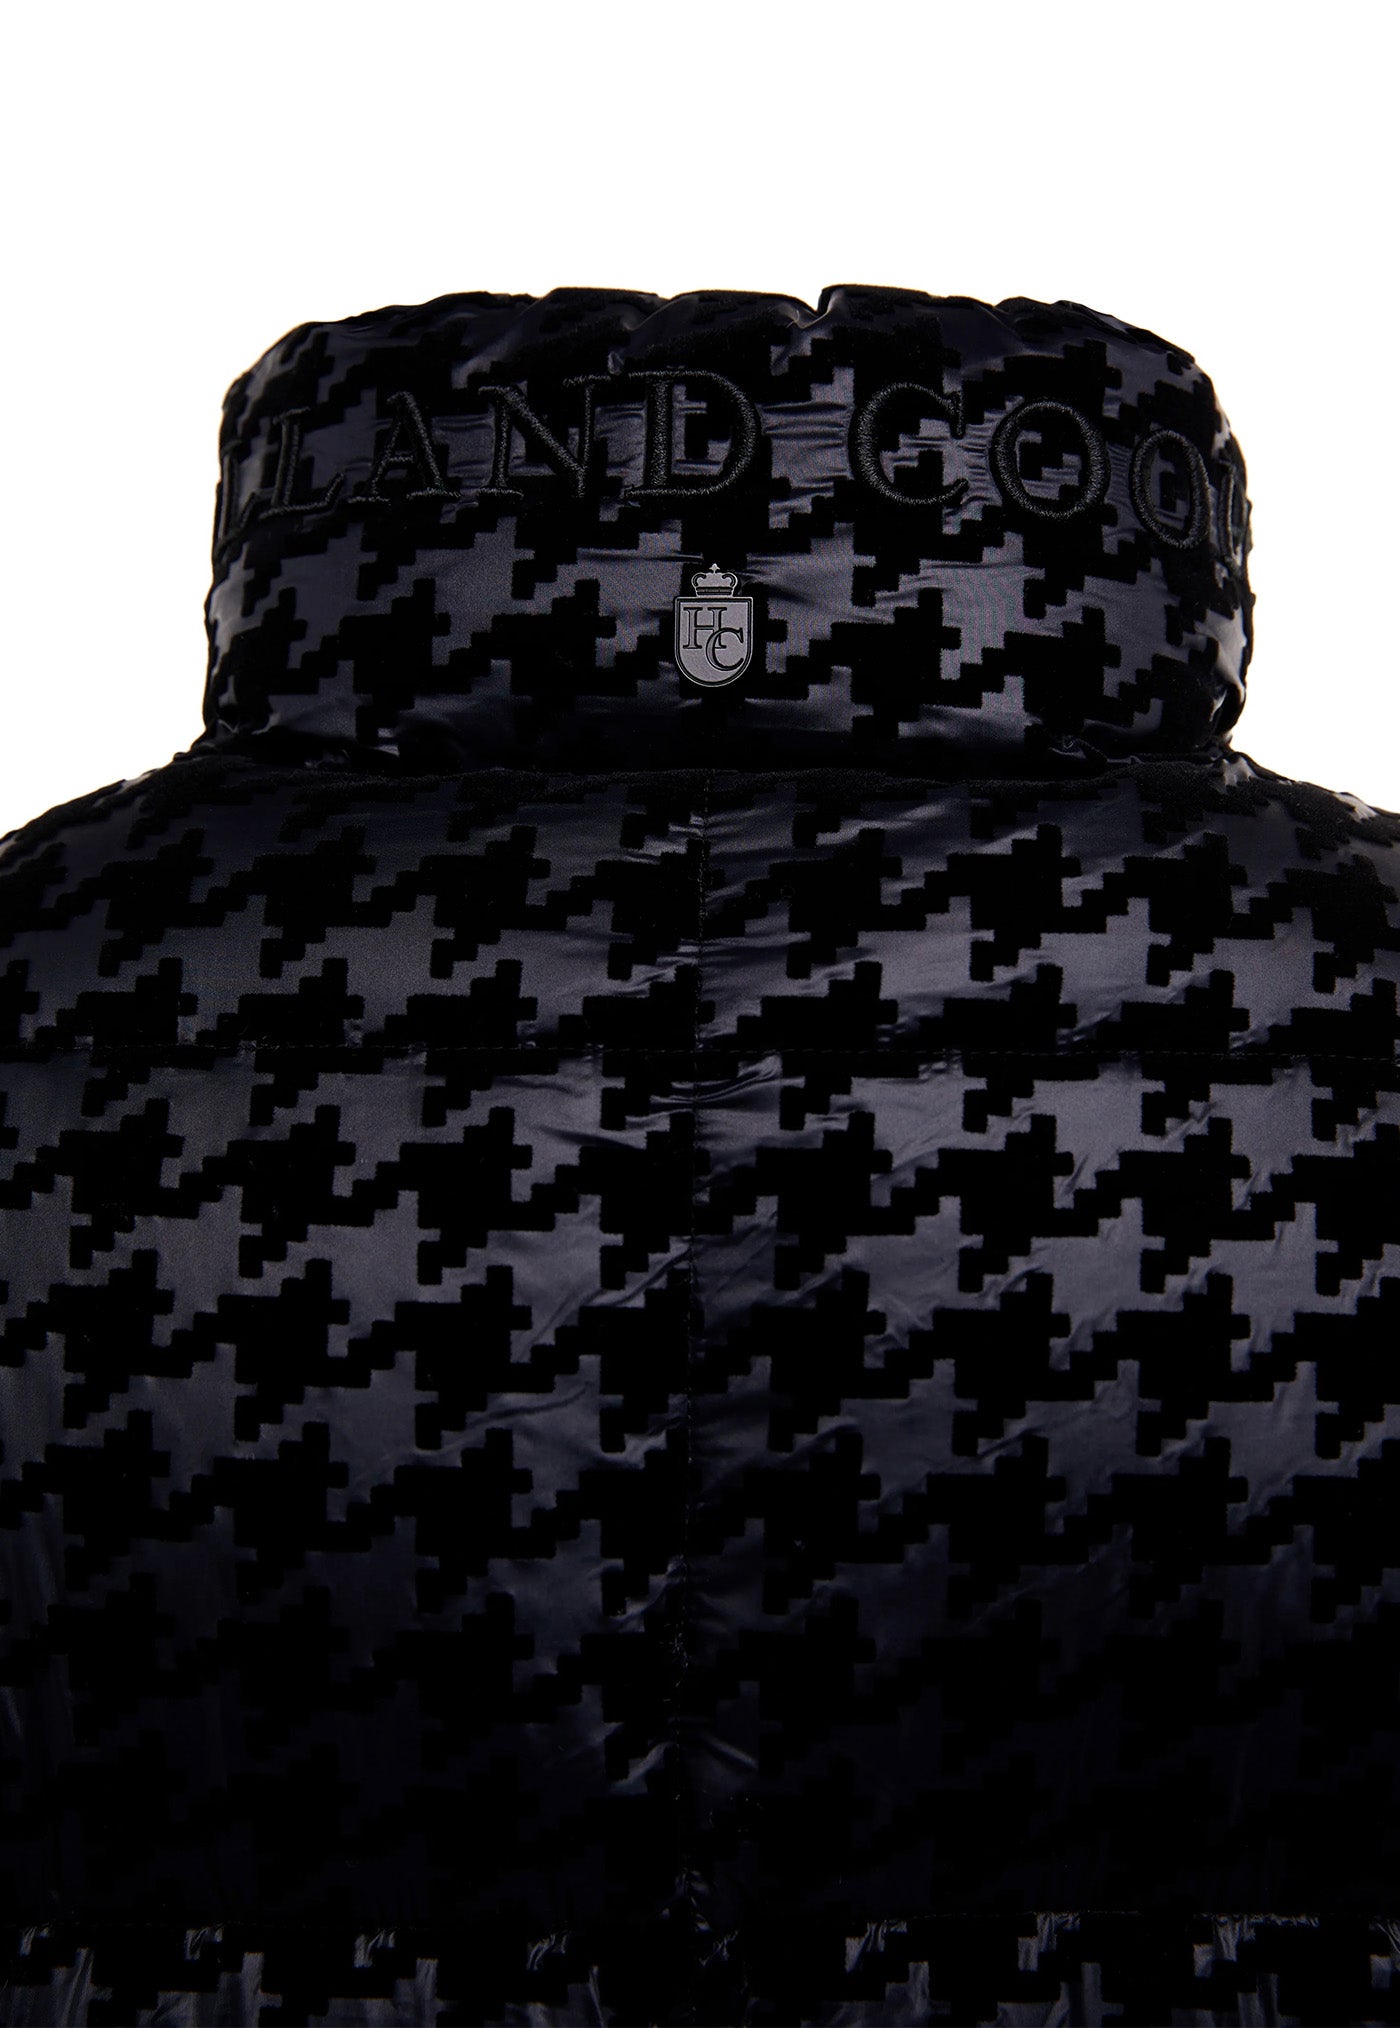 Crawford Longline Coat - Mono Houndstooth sold by Angel Divine